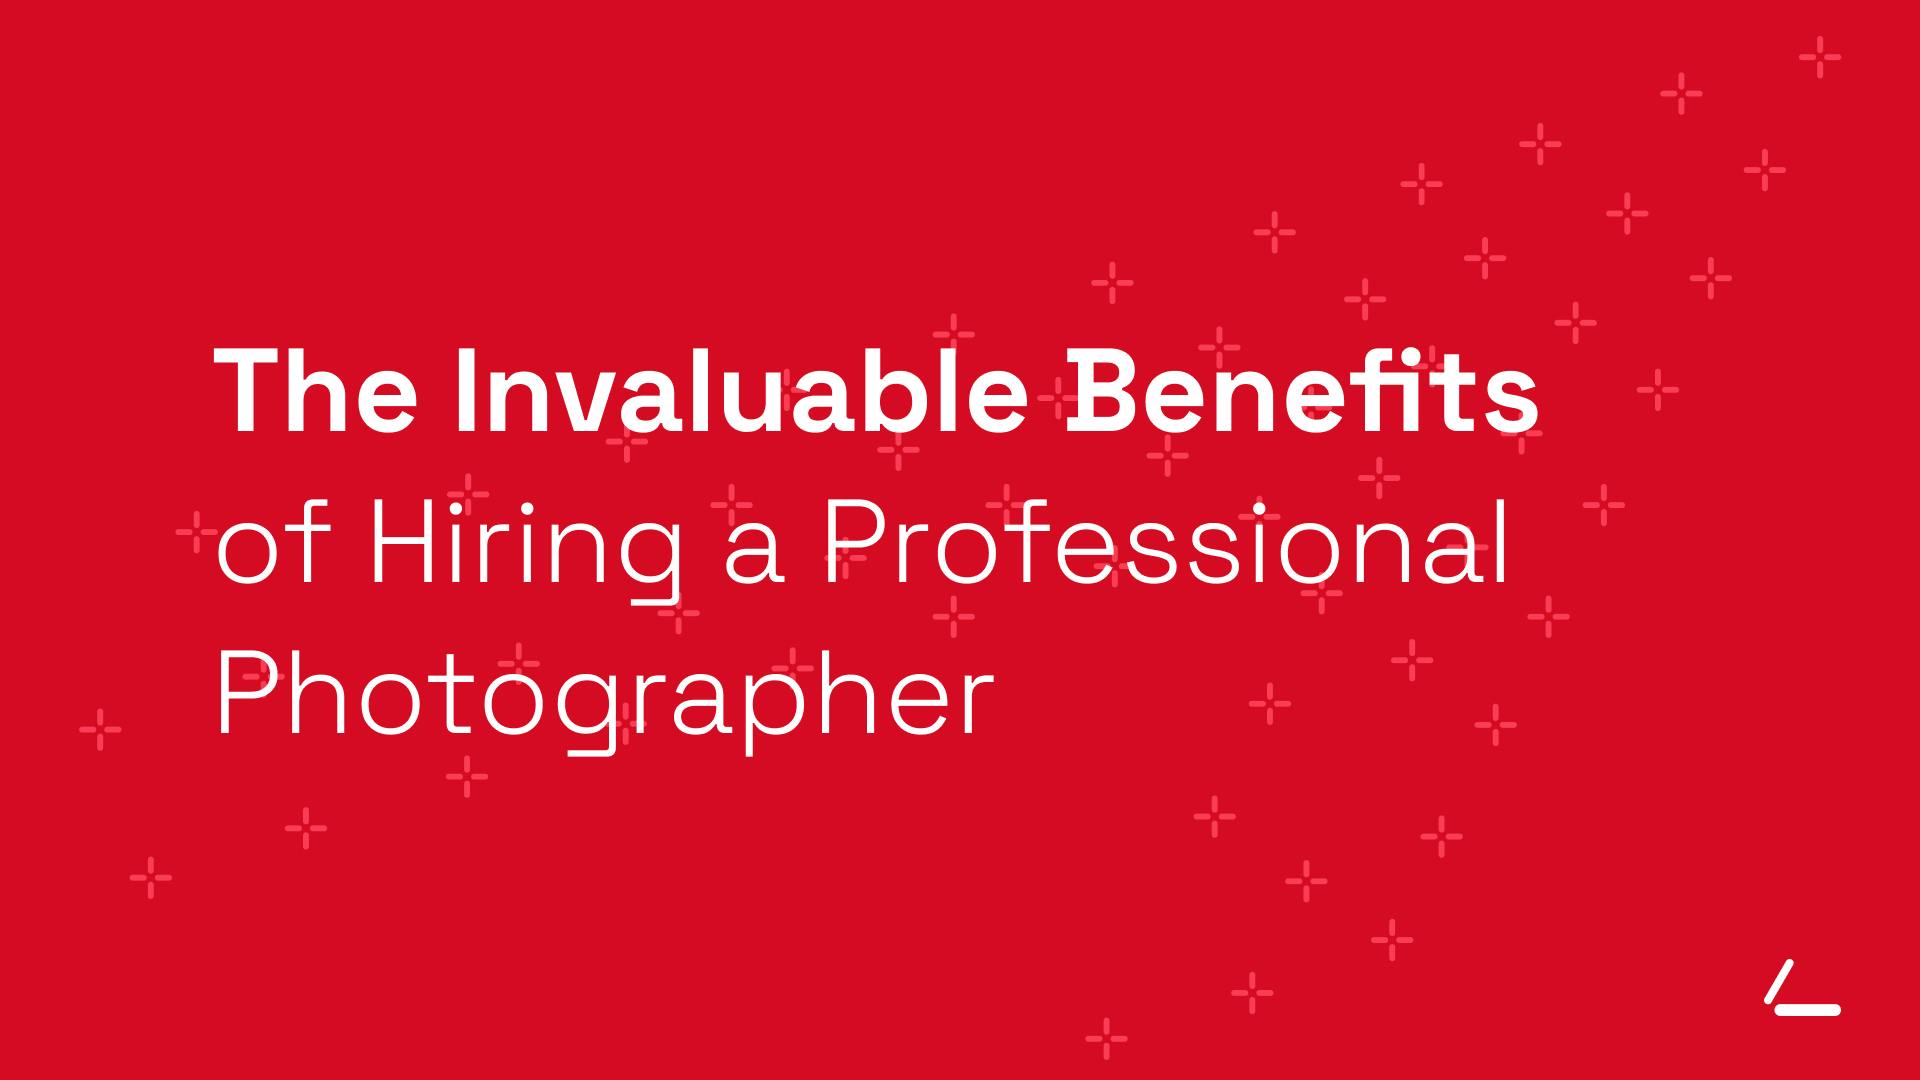 SEO Article Header - Red background with text about Photography